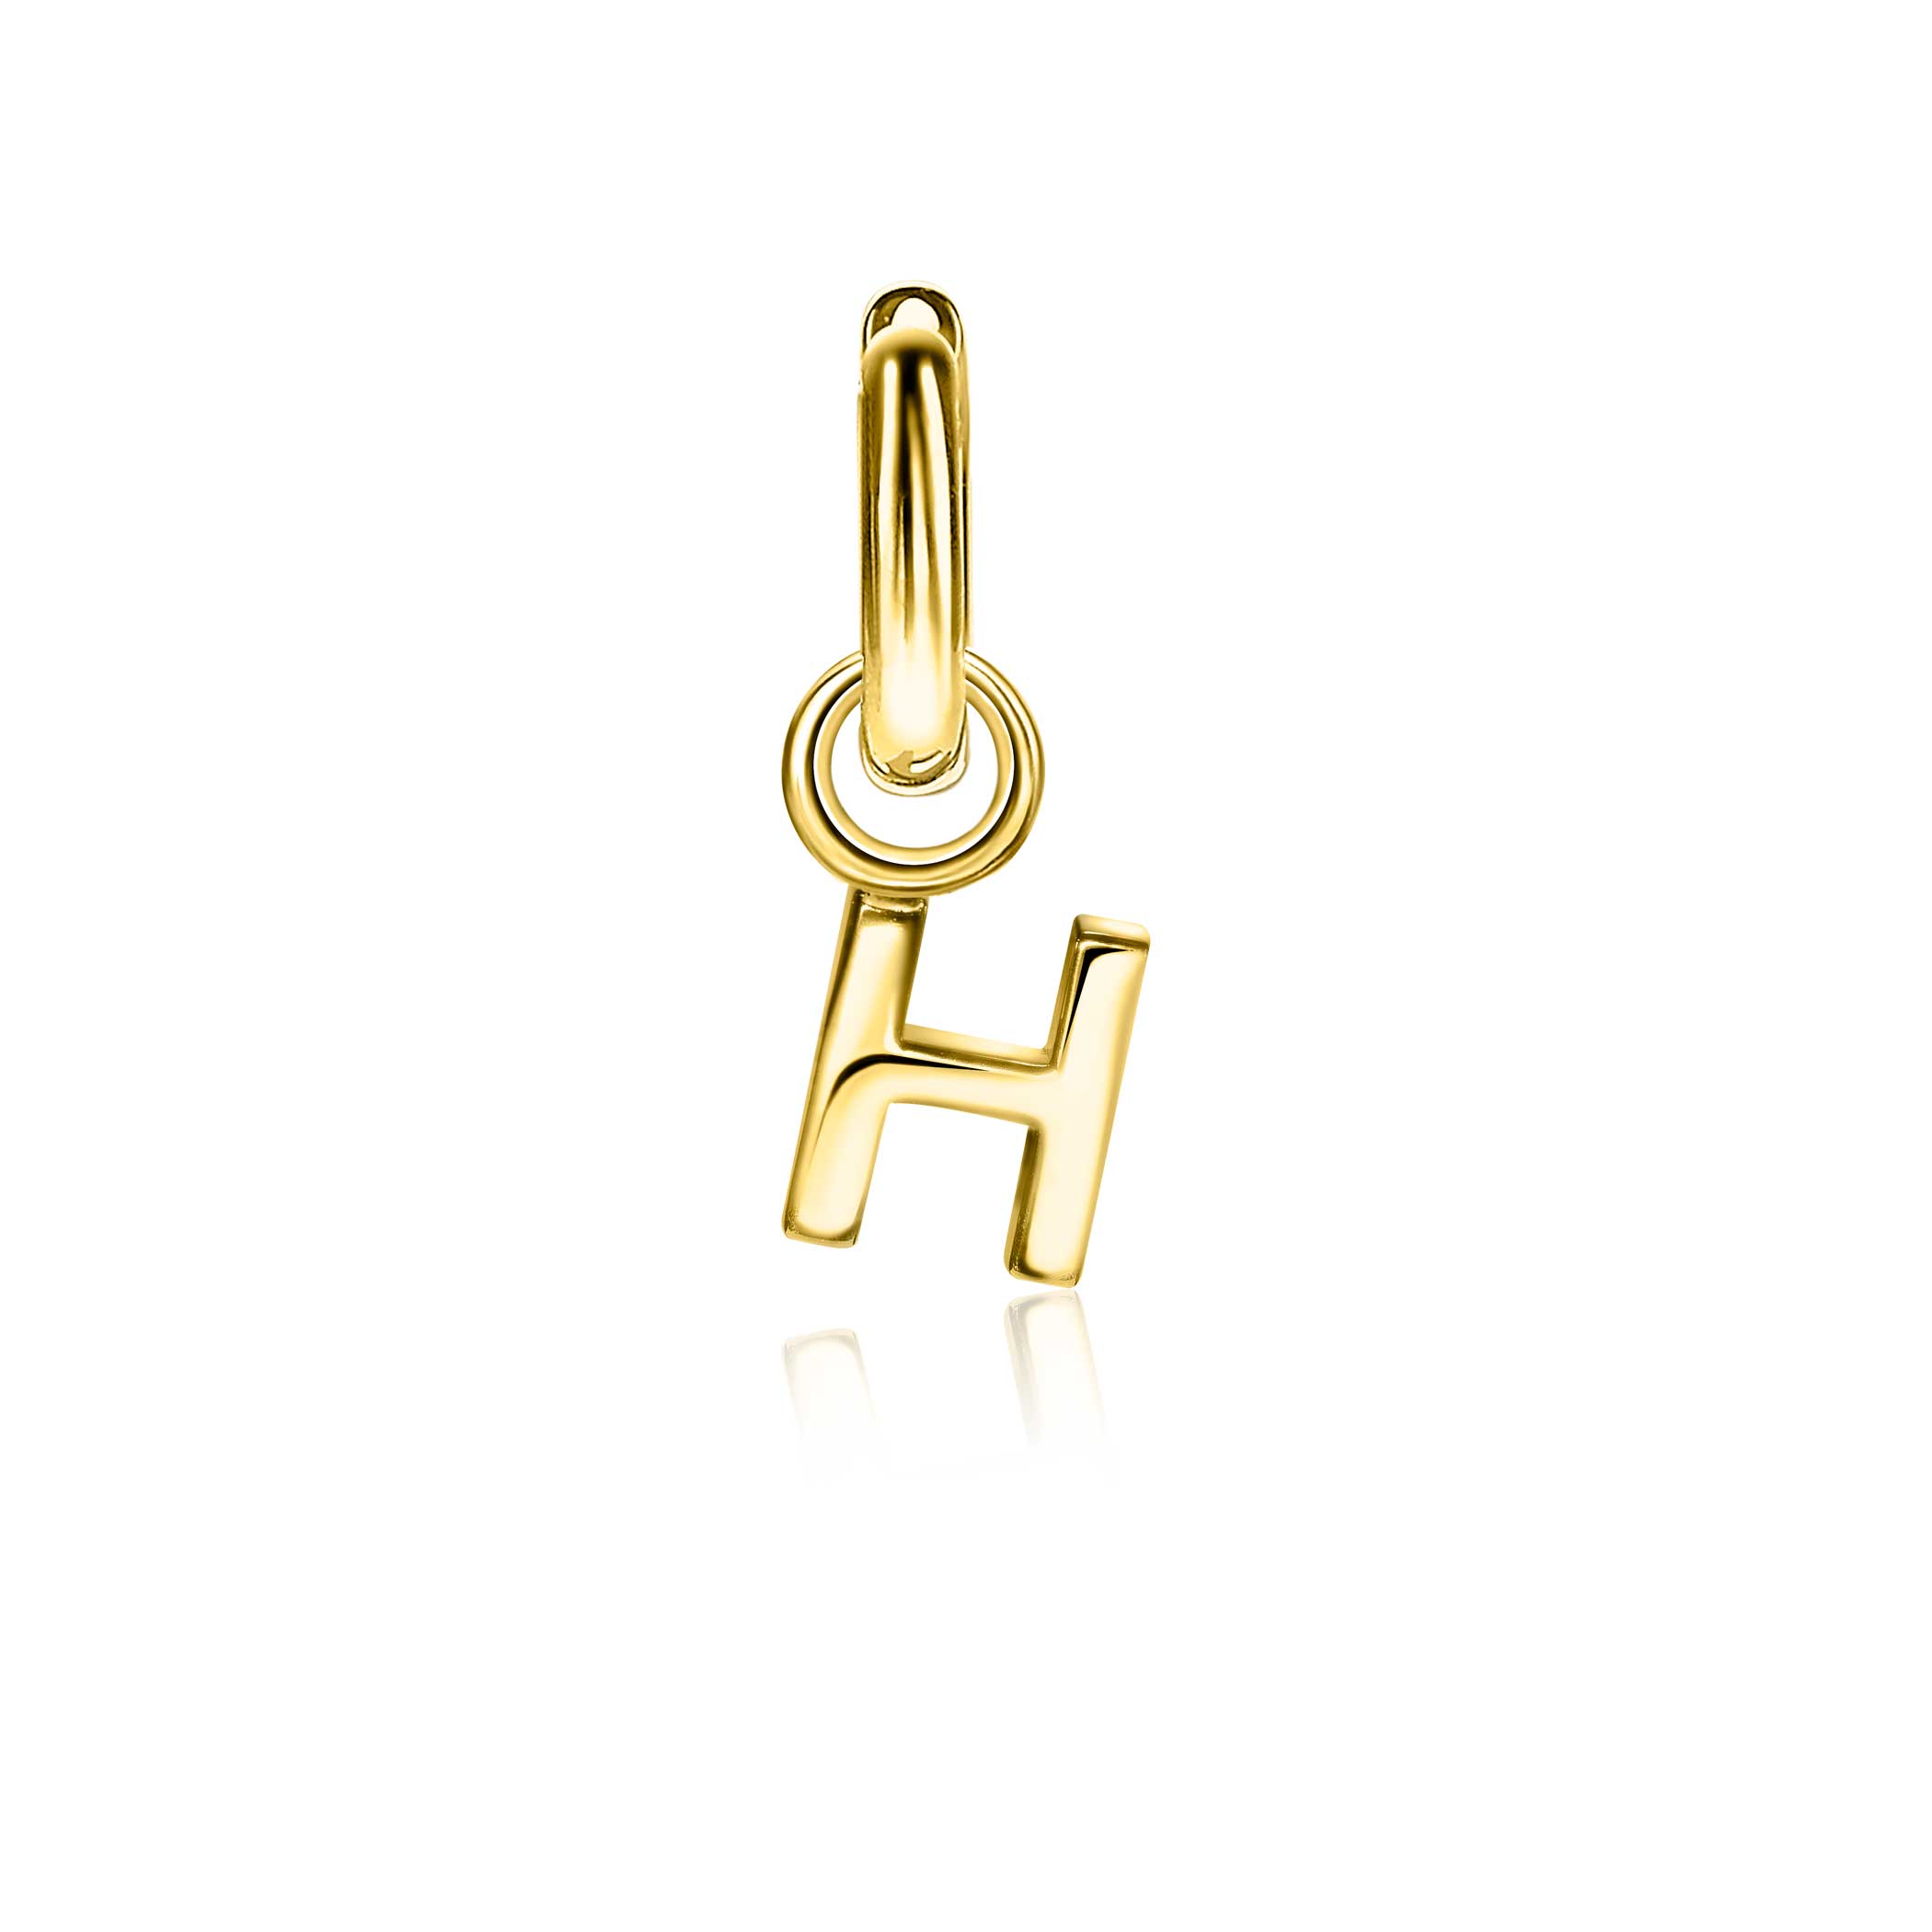 ZINZI Gold Plated Letter Earrings Pendant H price per piece ZICH2145H (excl. hoop earrings)